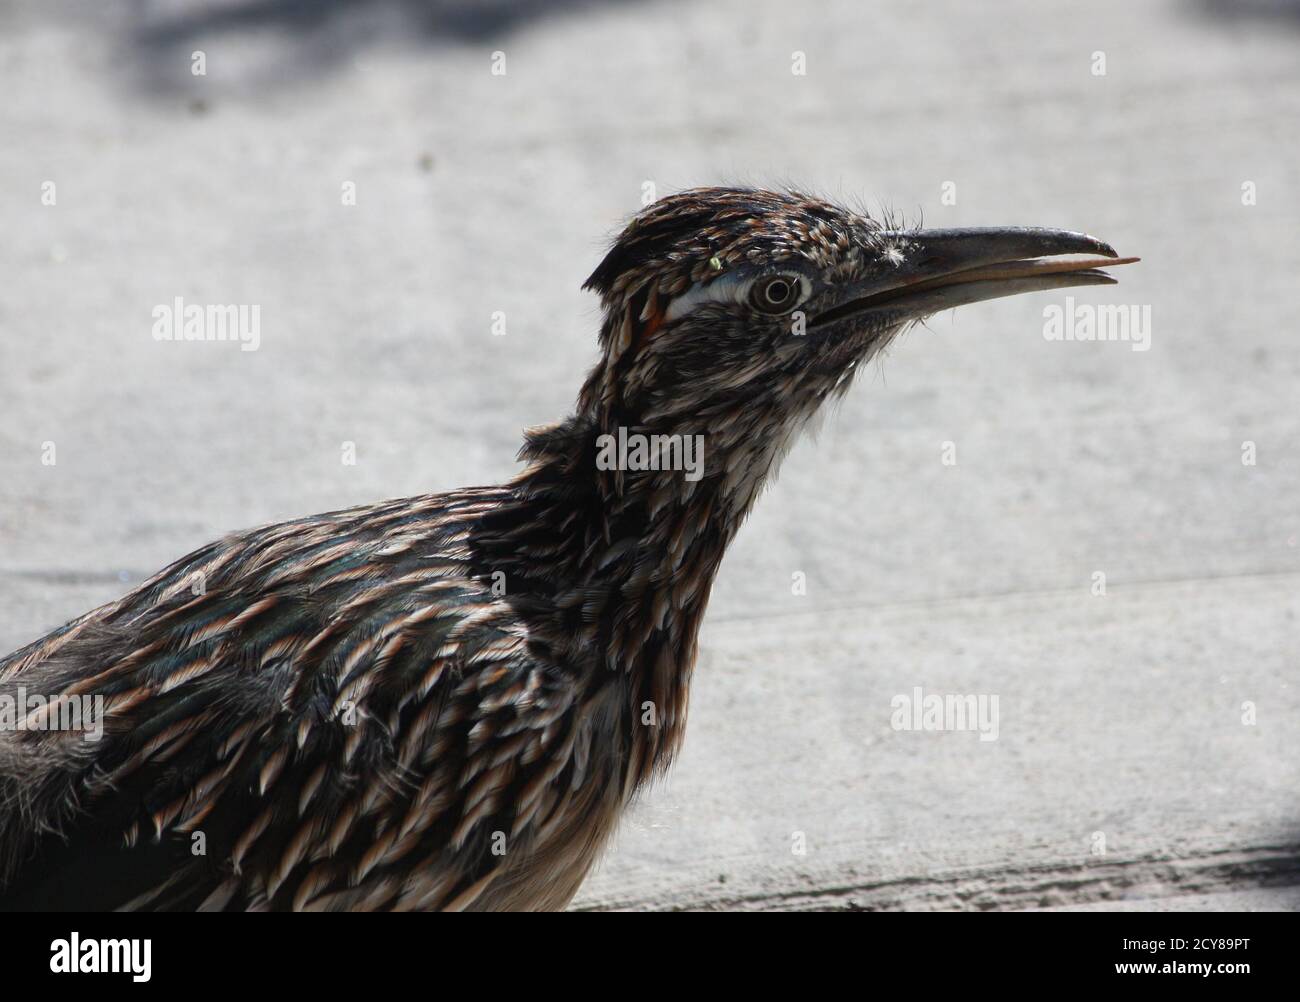 Roadrunner plays with lizard prey and eats the reptile’s tail for dessert after it’s shed in defense Stock Photo